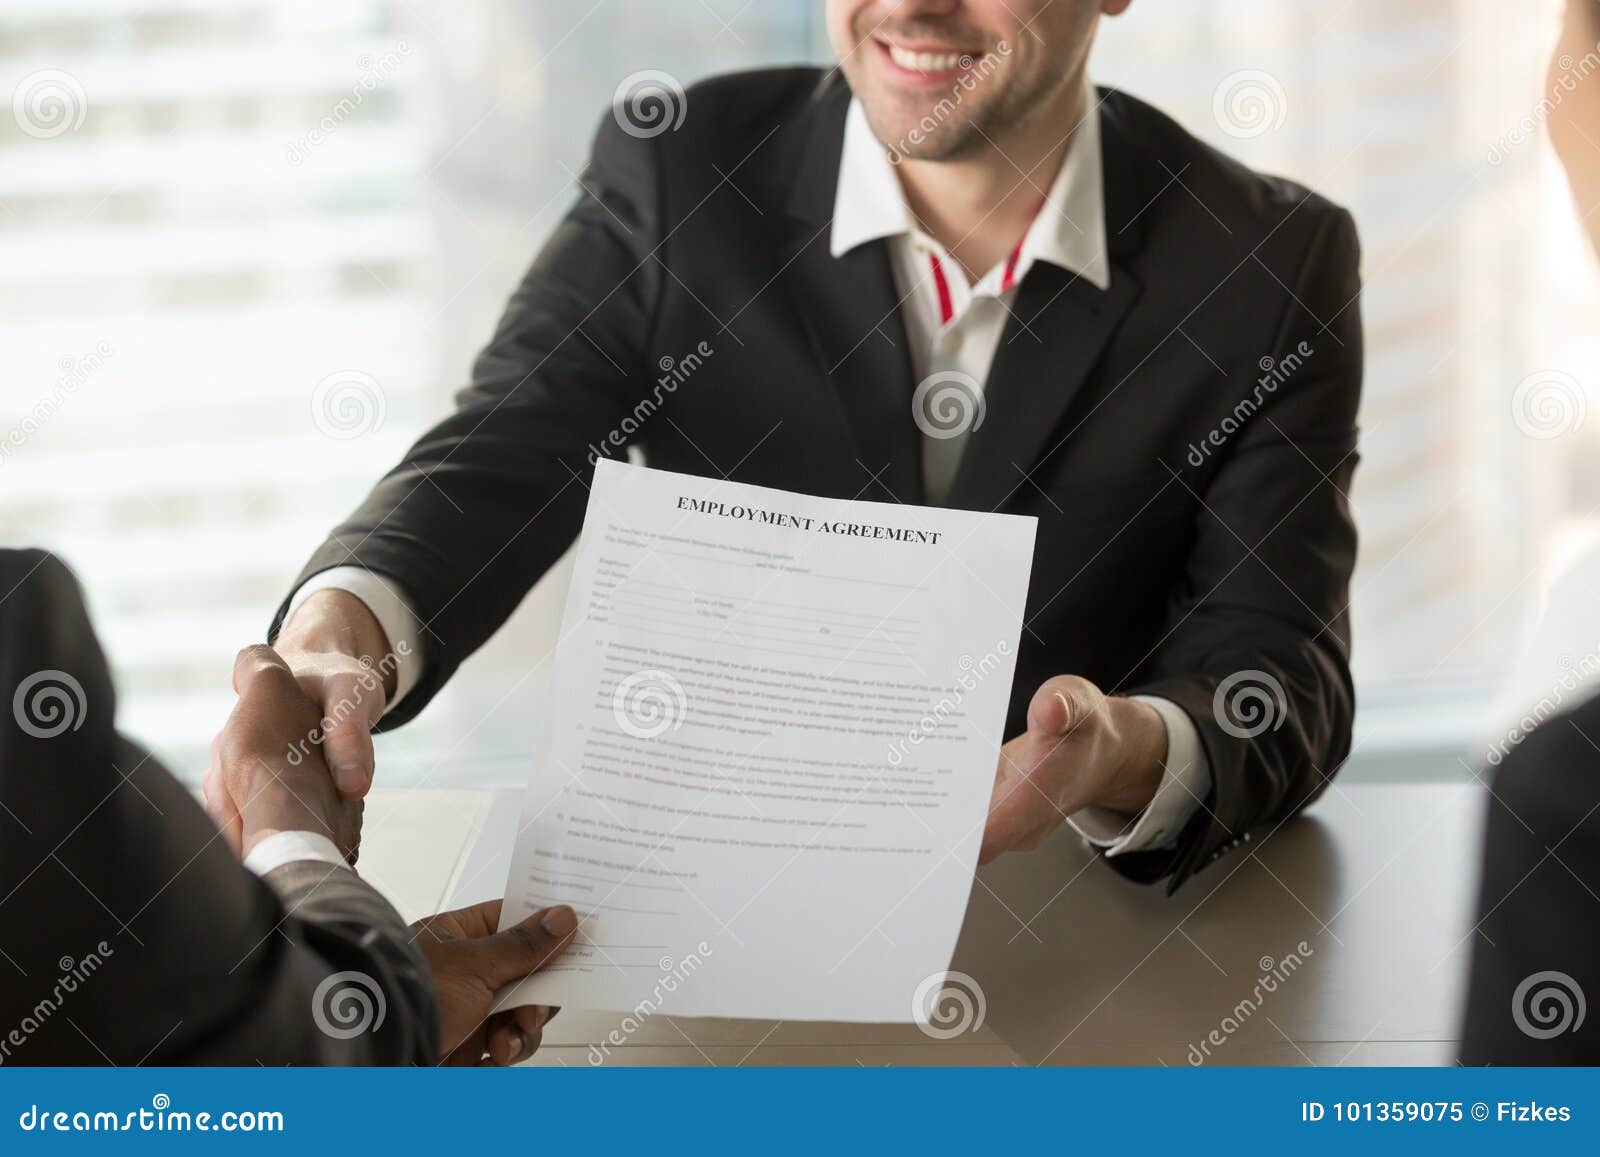 recruiter giving employment agreement to applicant